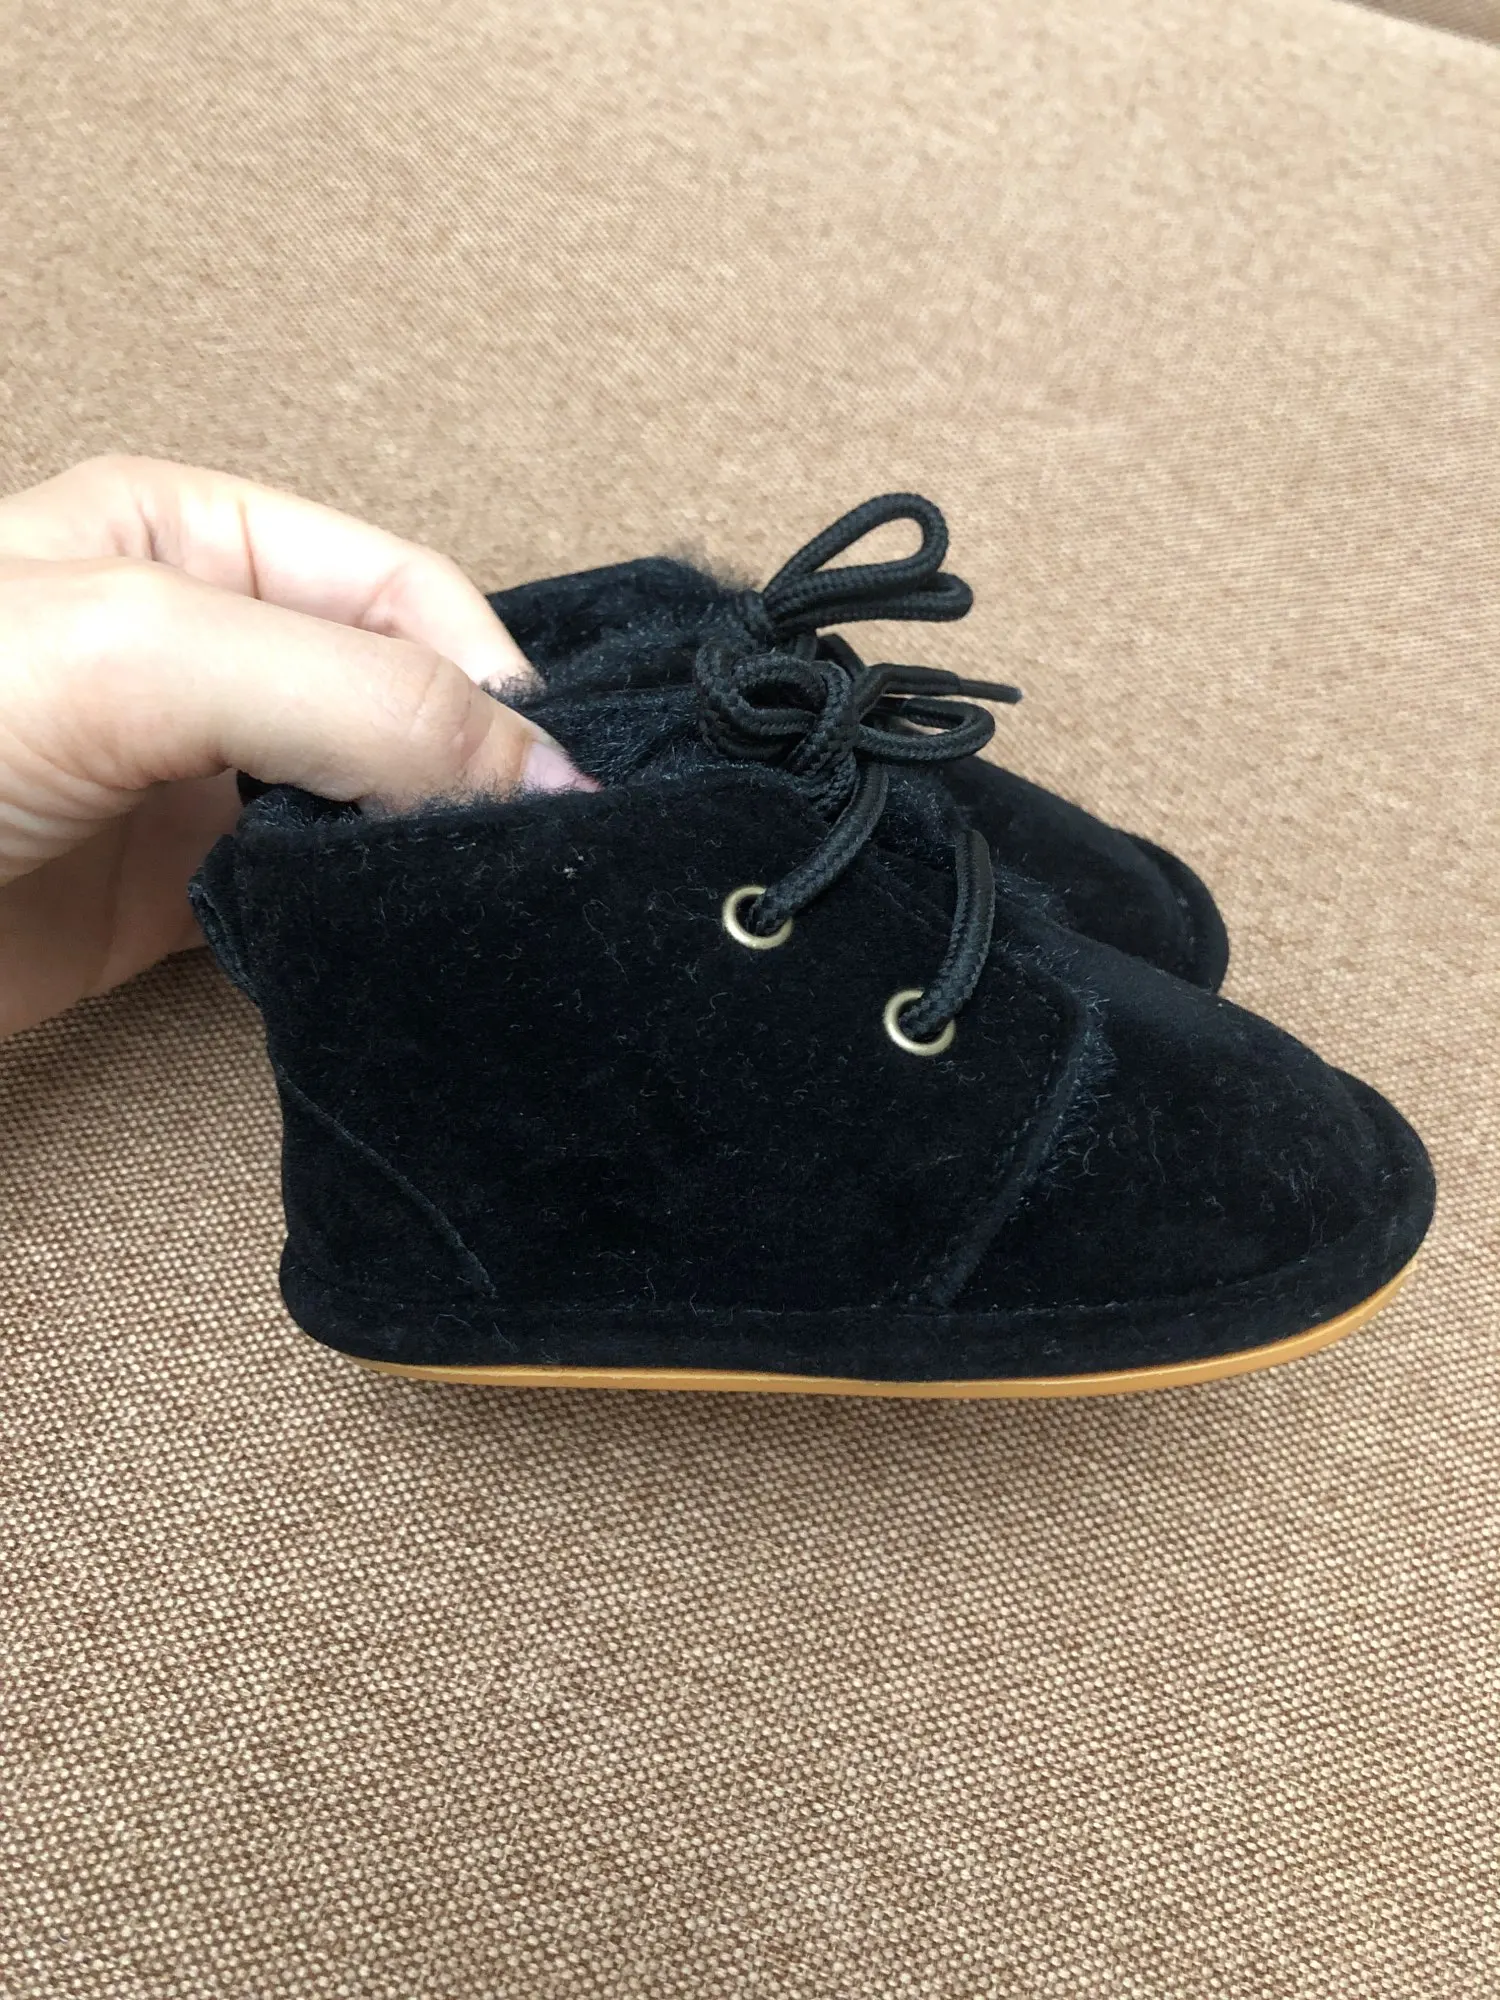 New Snow Baby Booties Shoes Baby Boy Girl Shoes Crib Shoes Winter Warm Cotton Anti-slip Sole Newborn Toddler First Walkers Shoes photo review